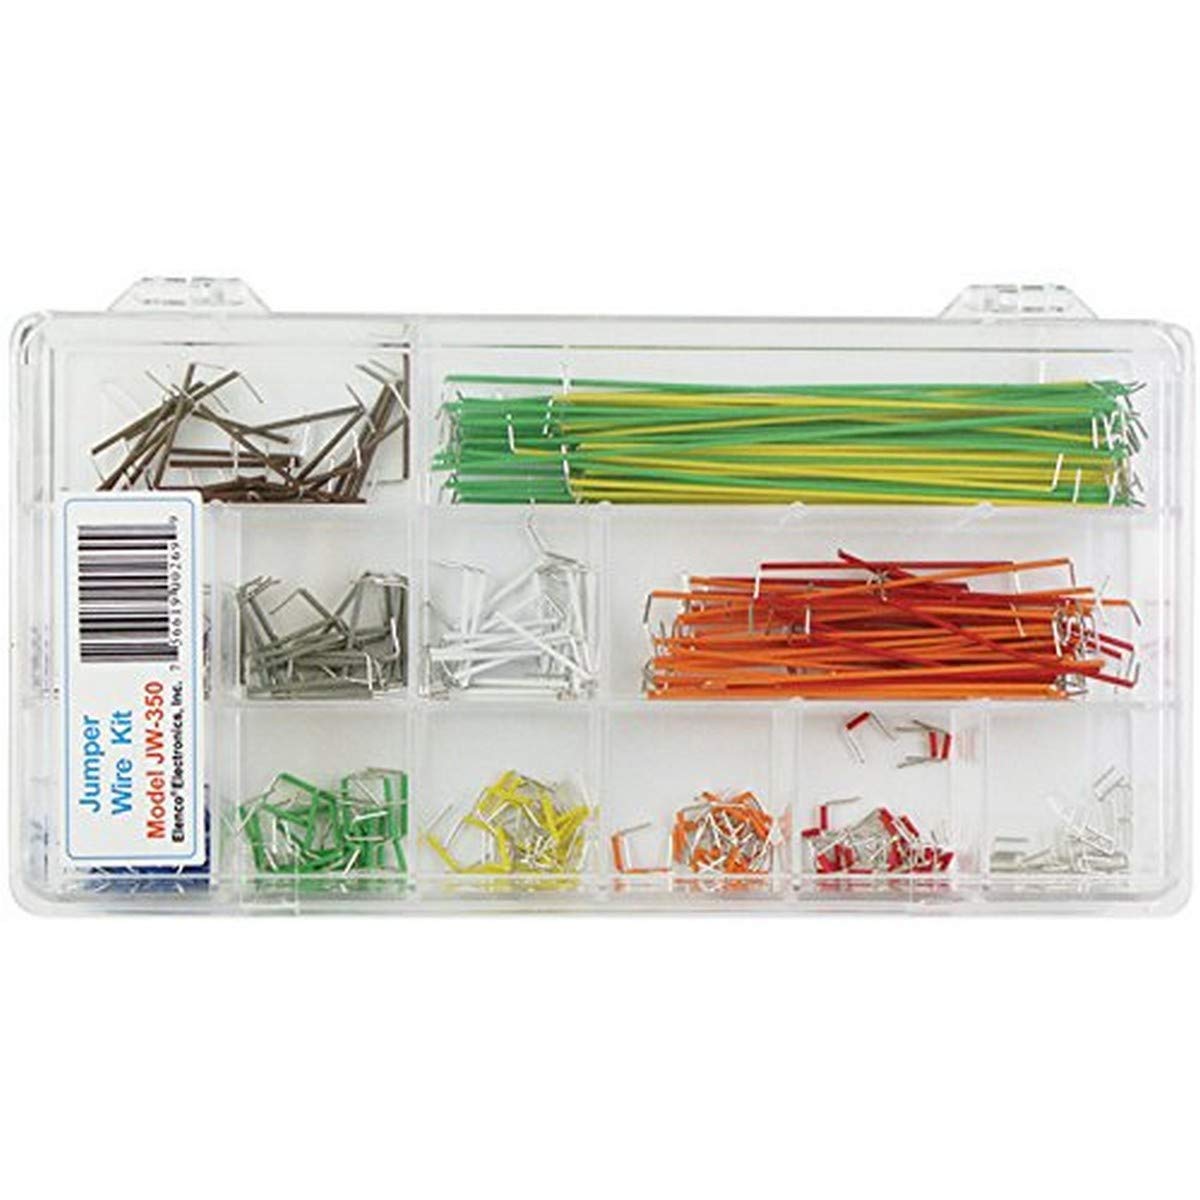 Book Cover Elenco 350 Piece Pre-formed Jumper Wire Kit | DIY Prototyping Projects | 350 lengths of pre-stripped - pre-formed AWG #22 - solid, color coded wire | 14 different lengths | Storage case included